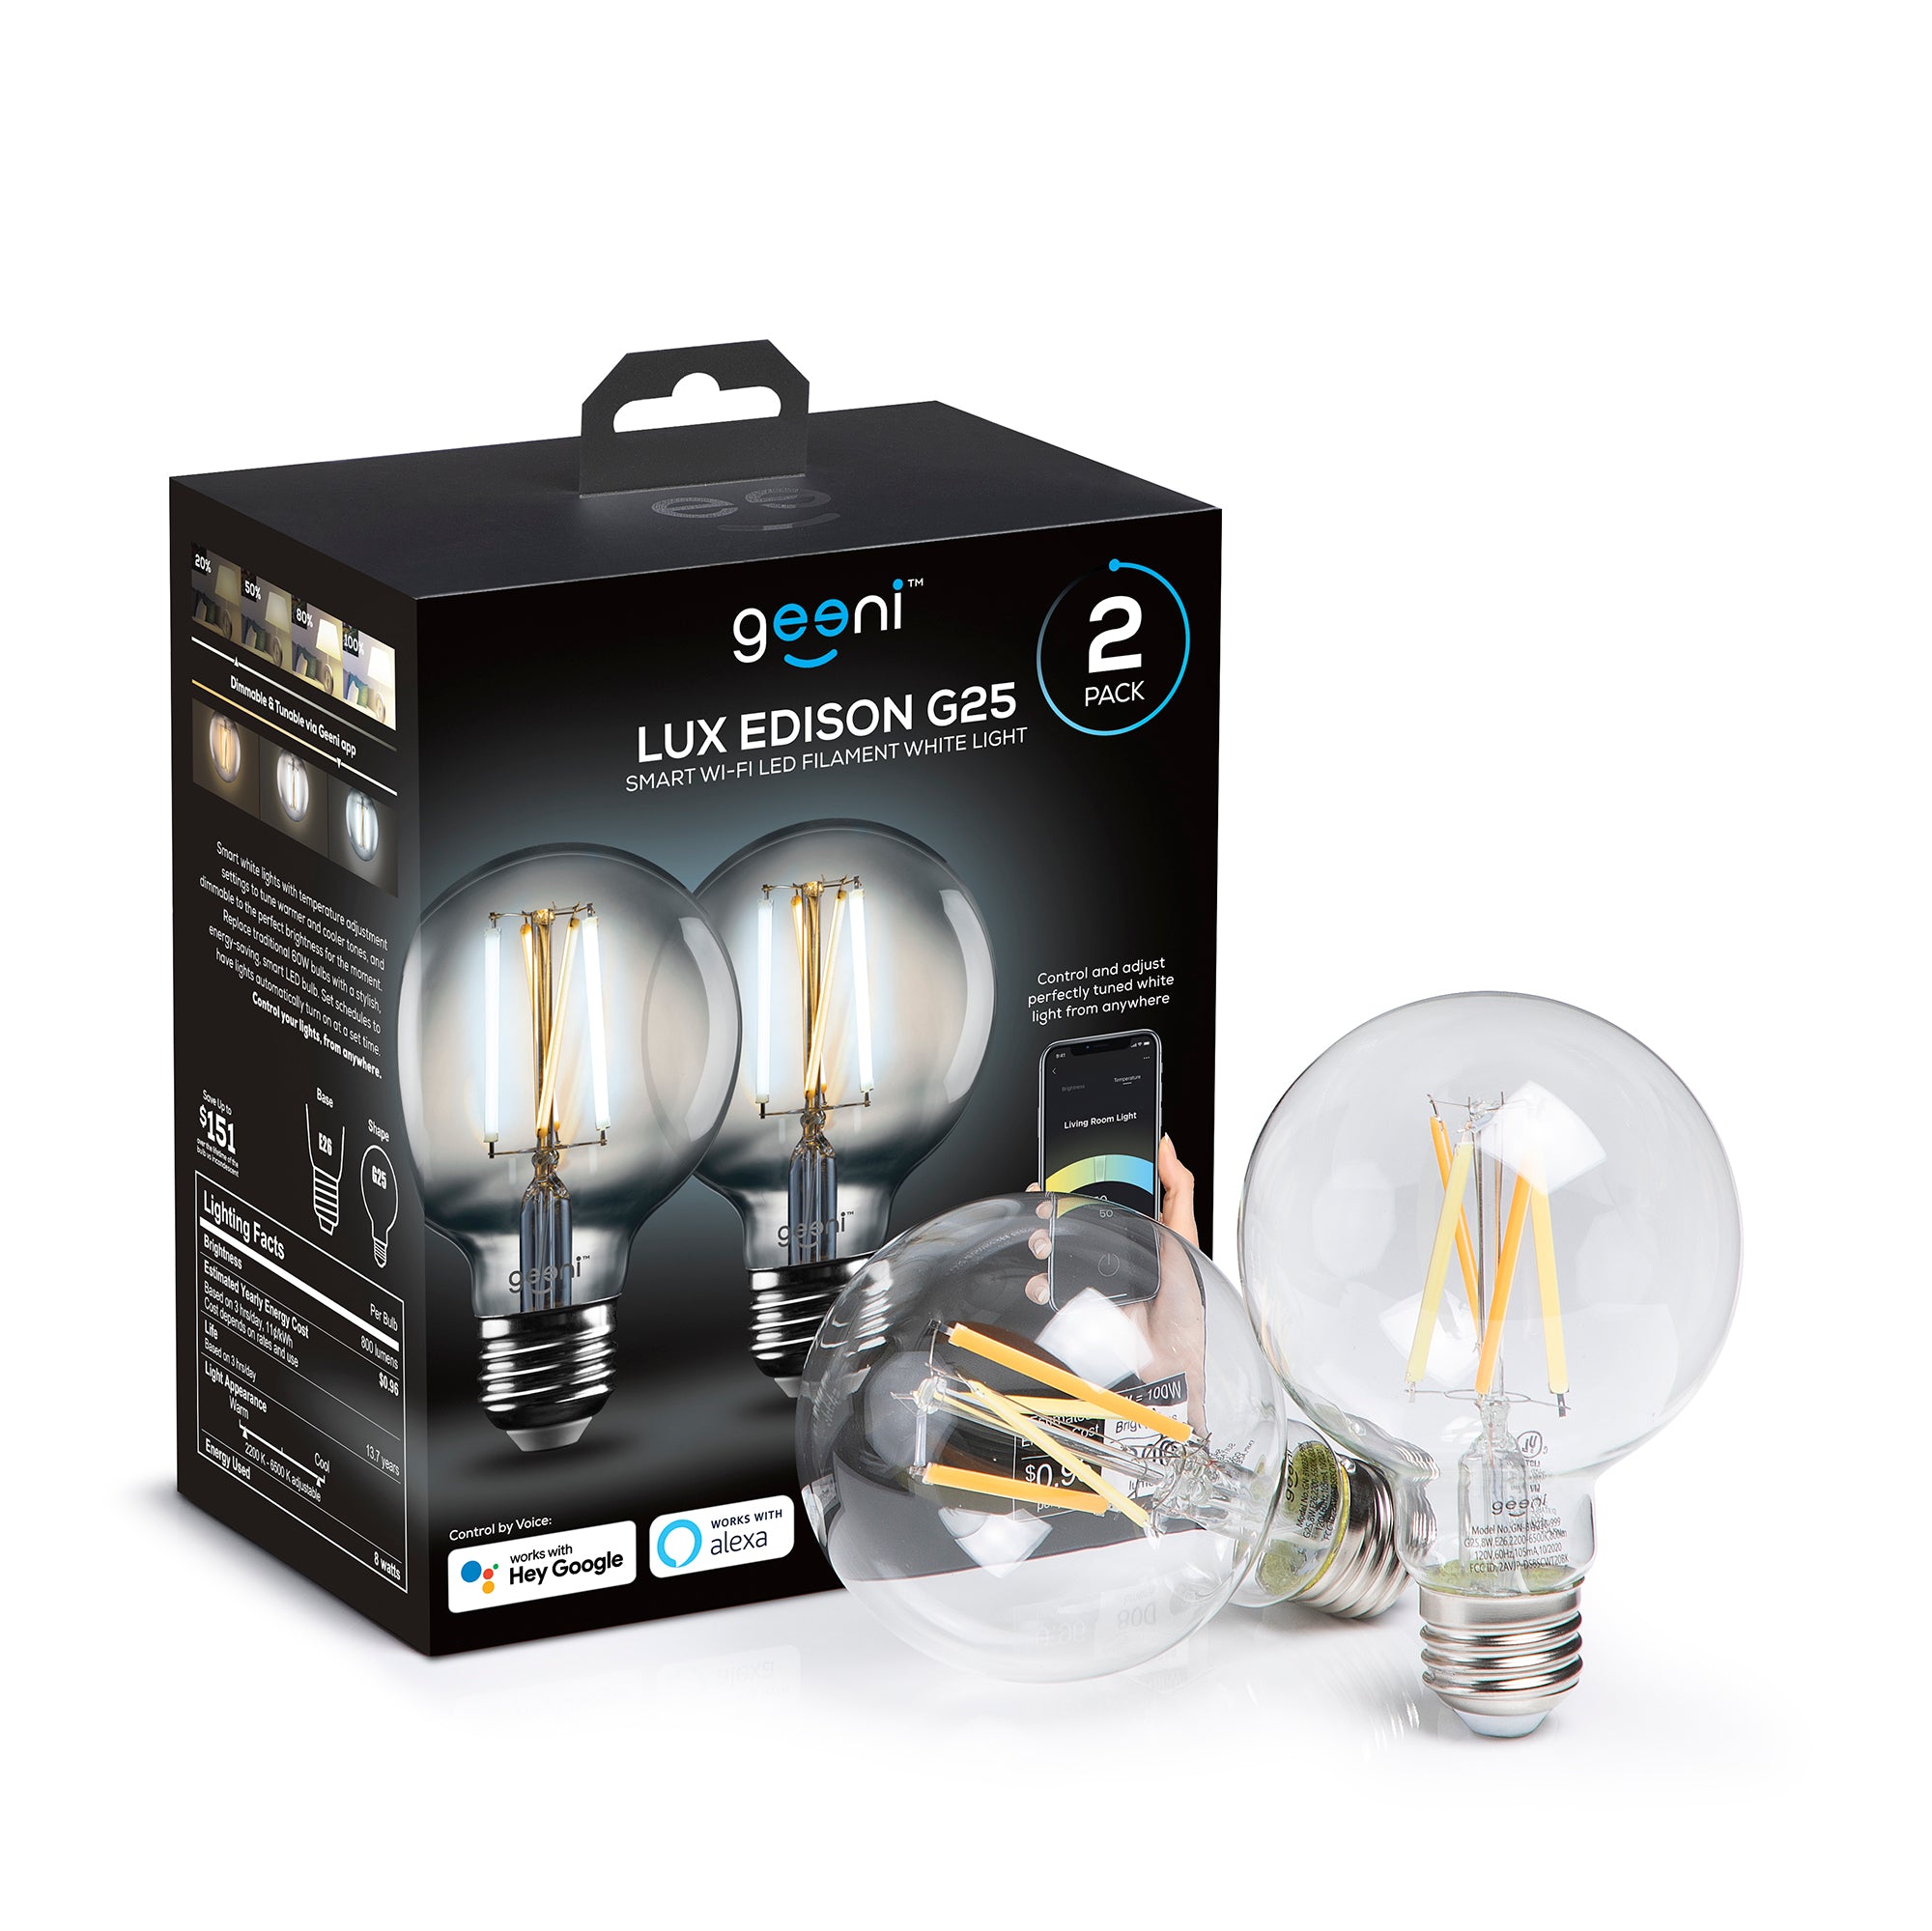 Geeni LUX Edison G25 E26 Smart LED Light Bulb - 100W Equivalent, White, Dimmable, Tunable (2-Pack)